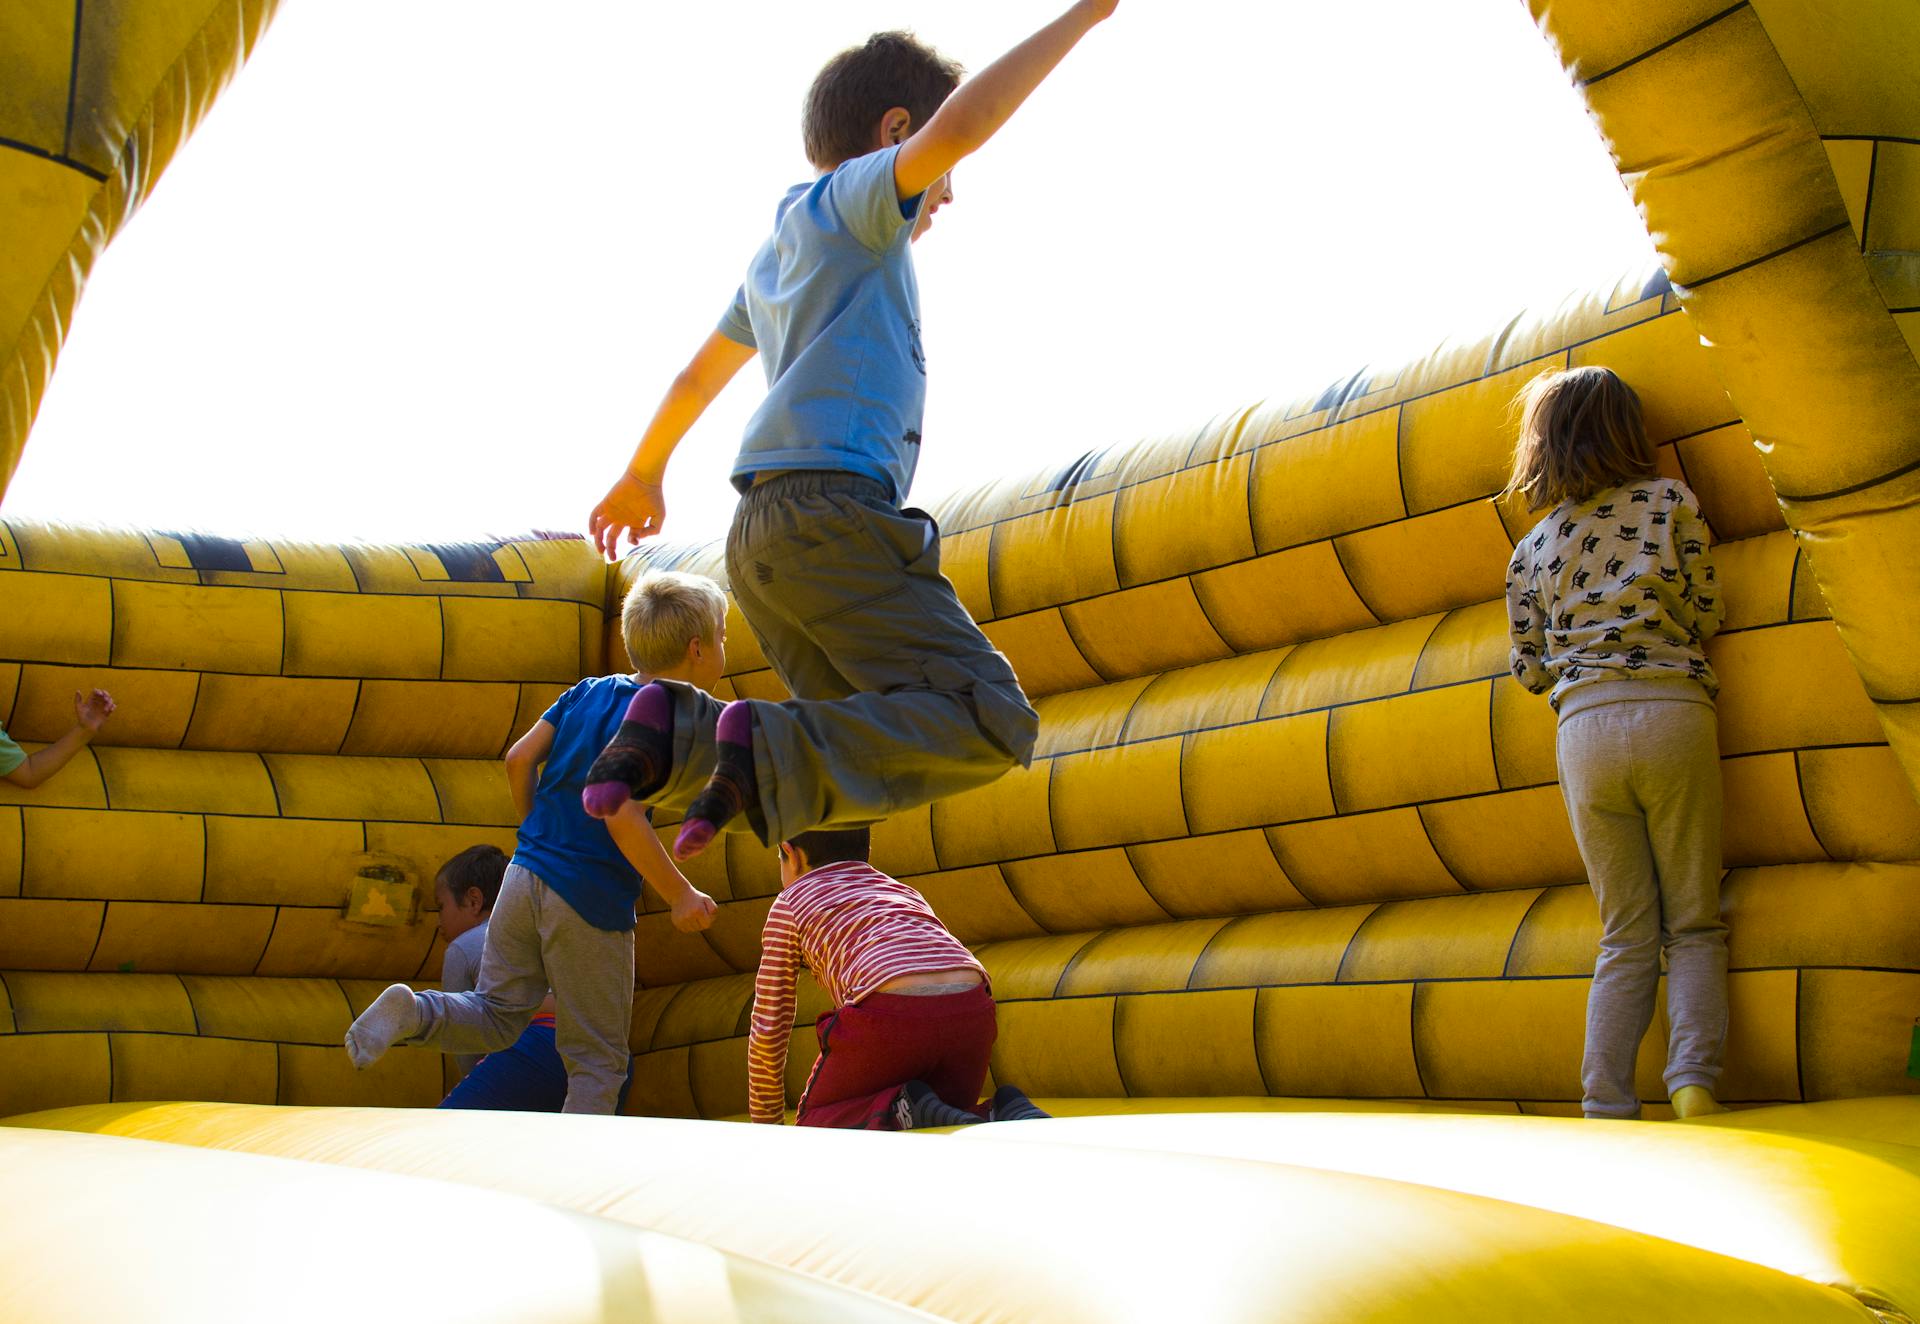 Children playing on an inflatable castle | Source: Pexels